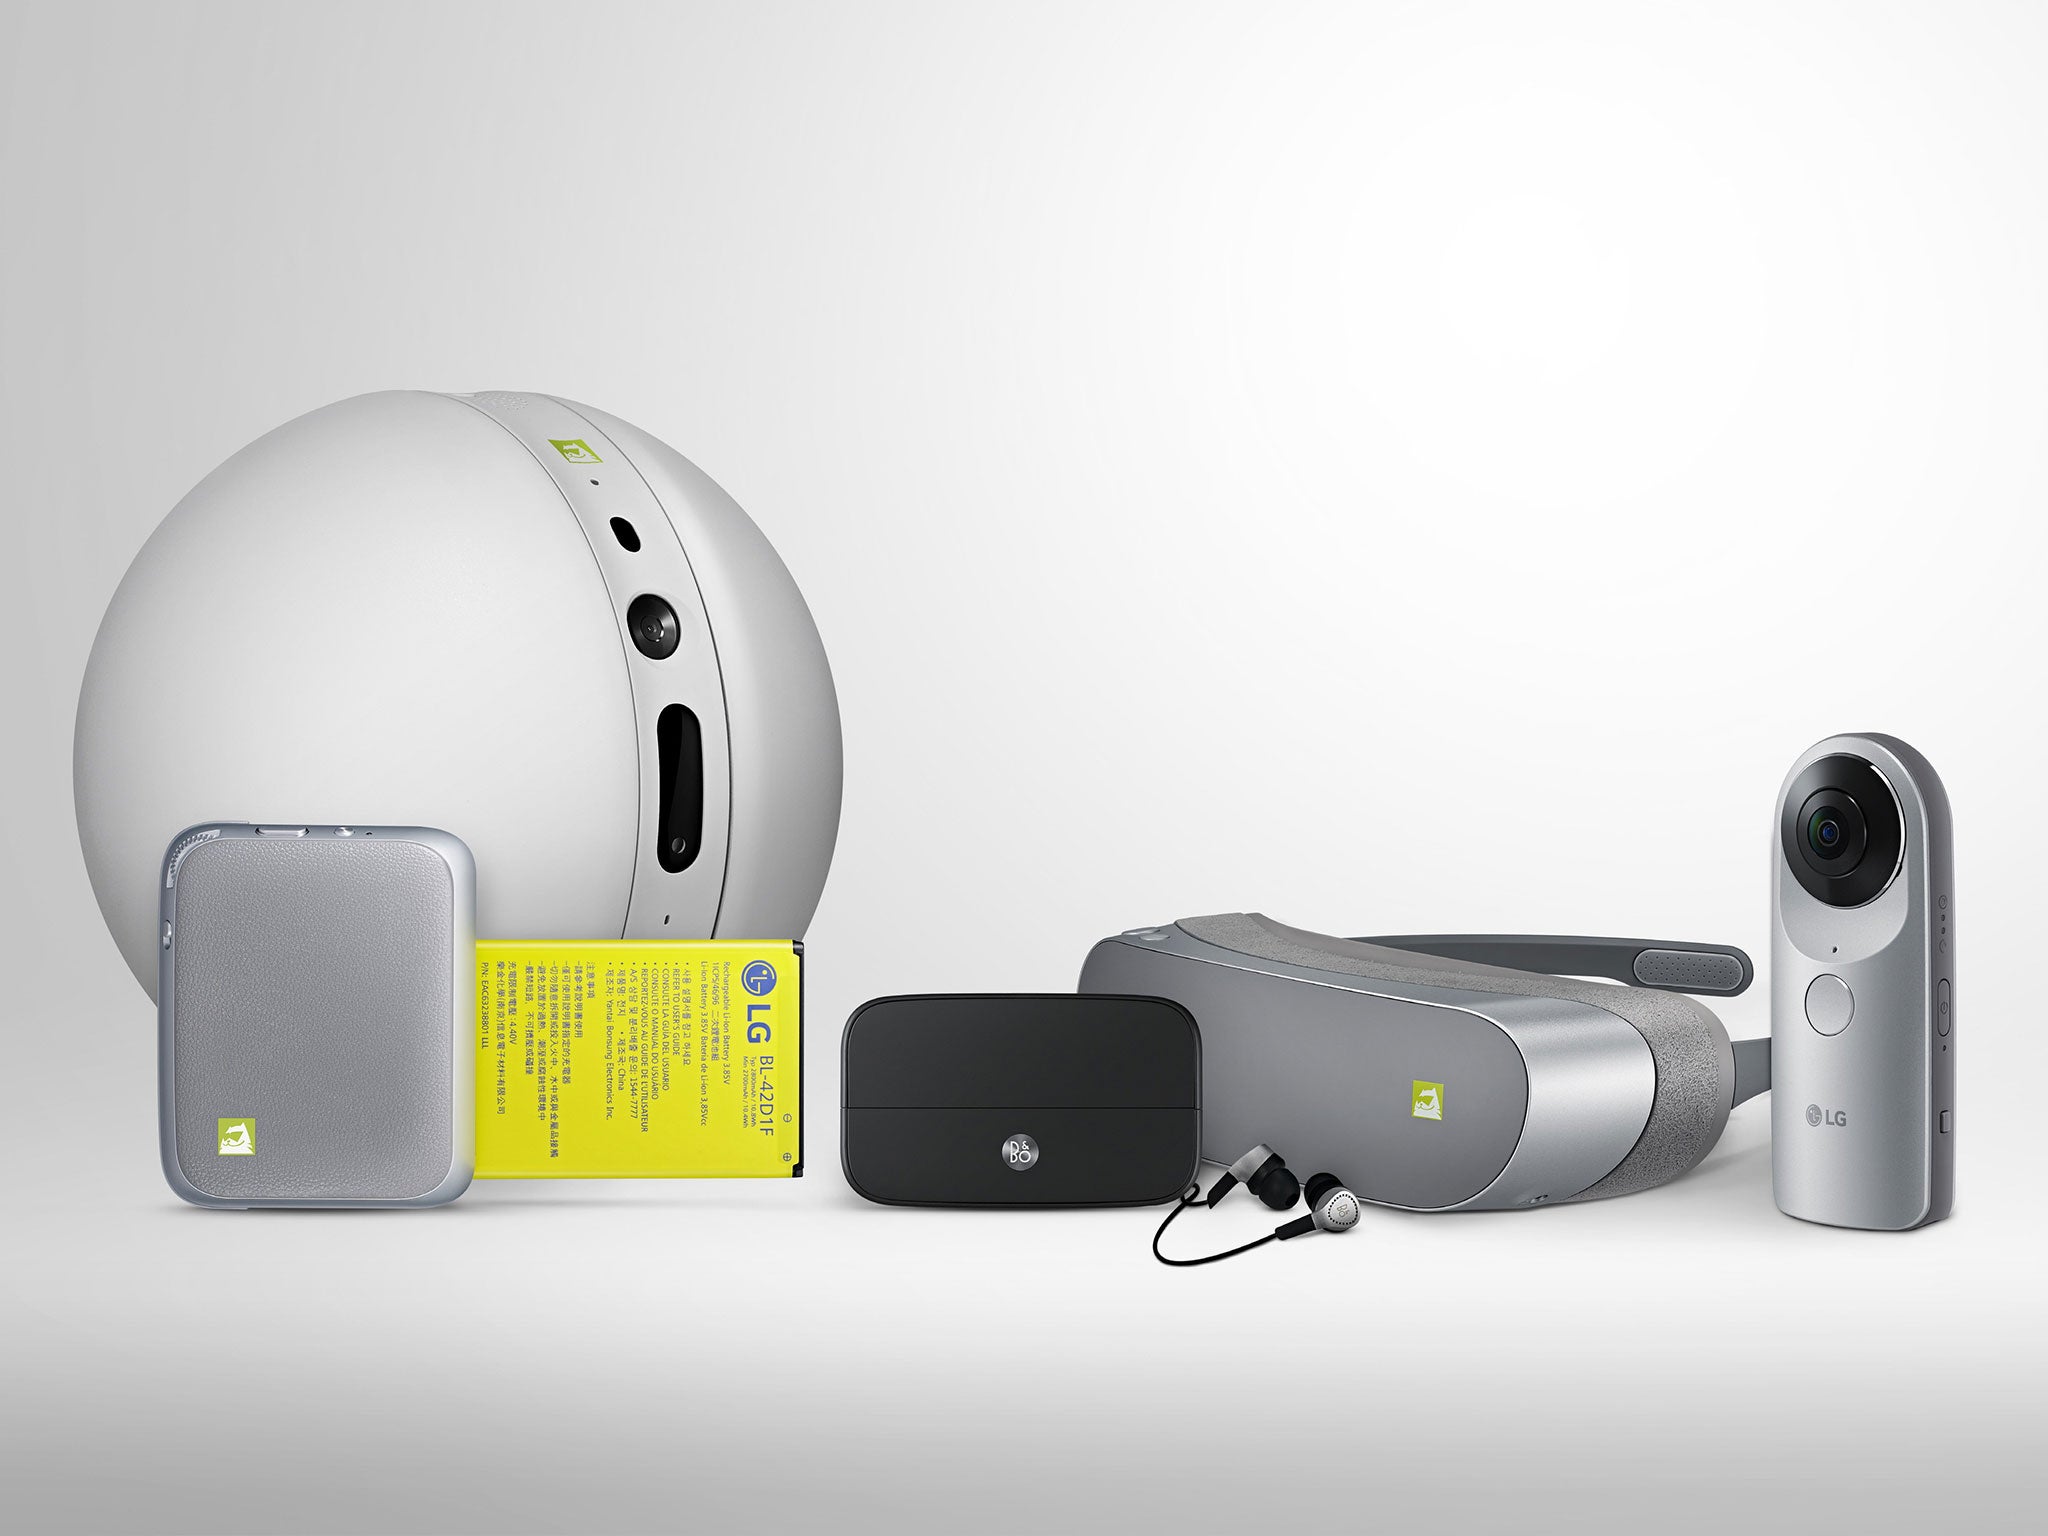 The full range of LG's 'Friends' for the G5 - (L-R) the LG Rolling Bot, the CAM Plus extended battery/camera control pack, the Bang and Olufsen DAC, the LG 360 VR headset, and the LG 360 CAM